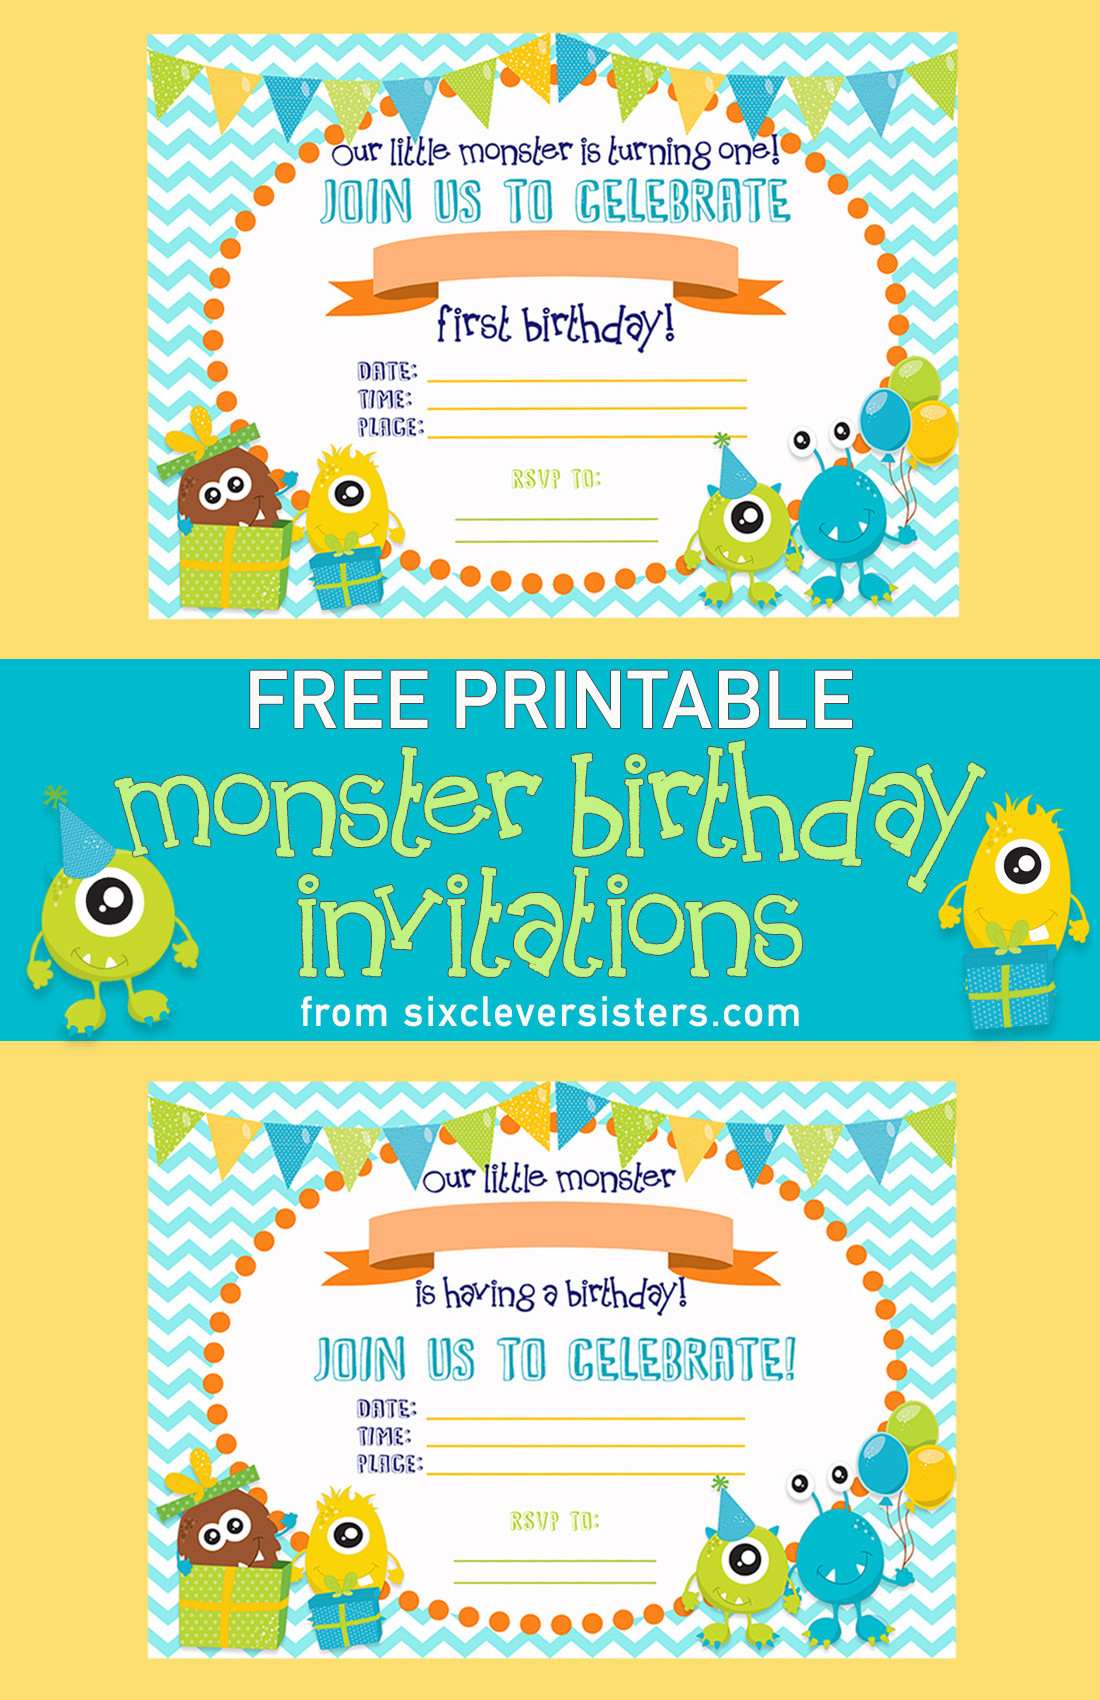 Free Printable Birthday Decorations
 FREE PRINTABLE Monster Birthday Invitations Six Clever